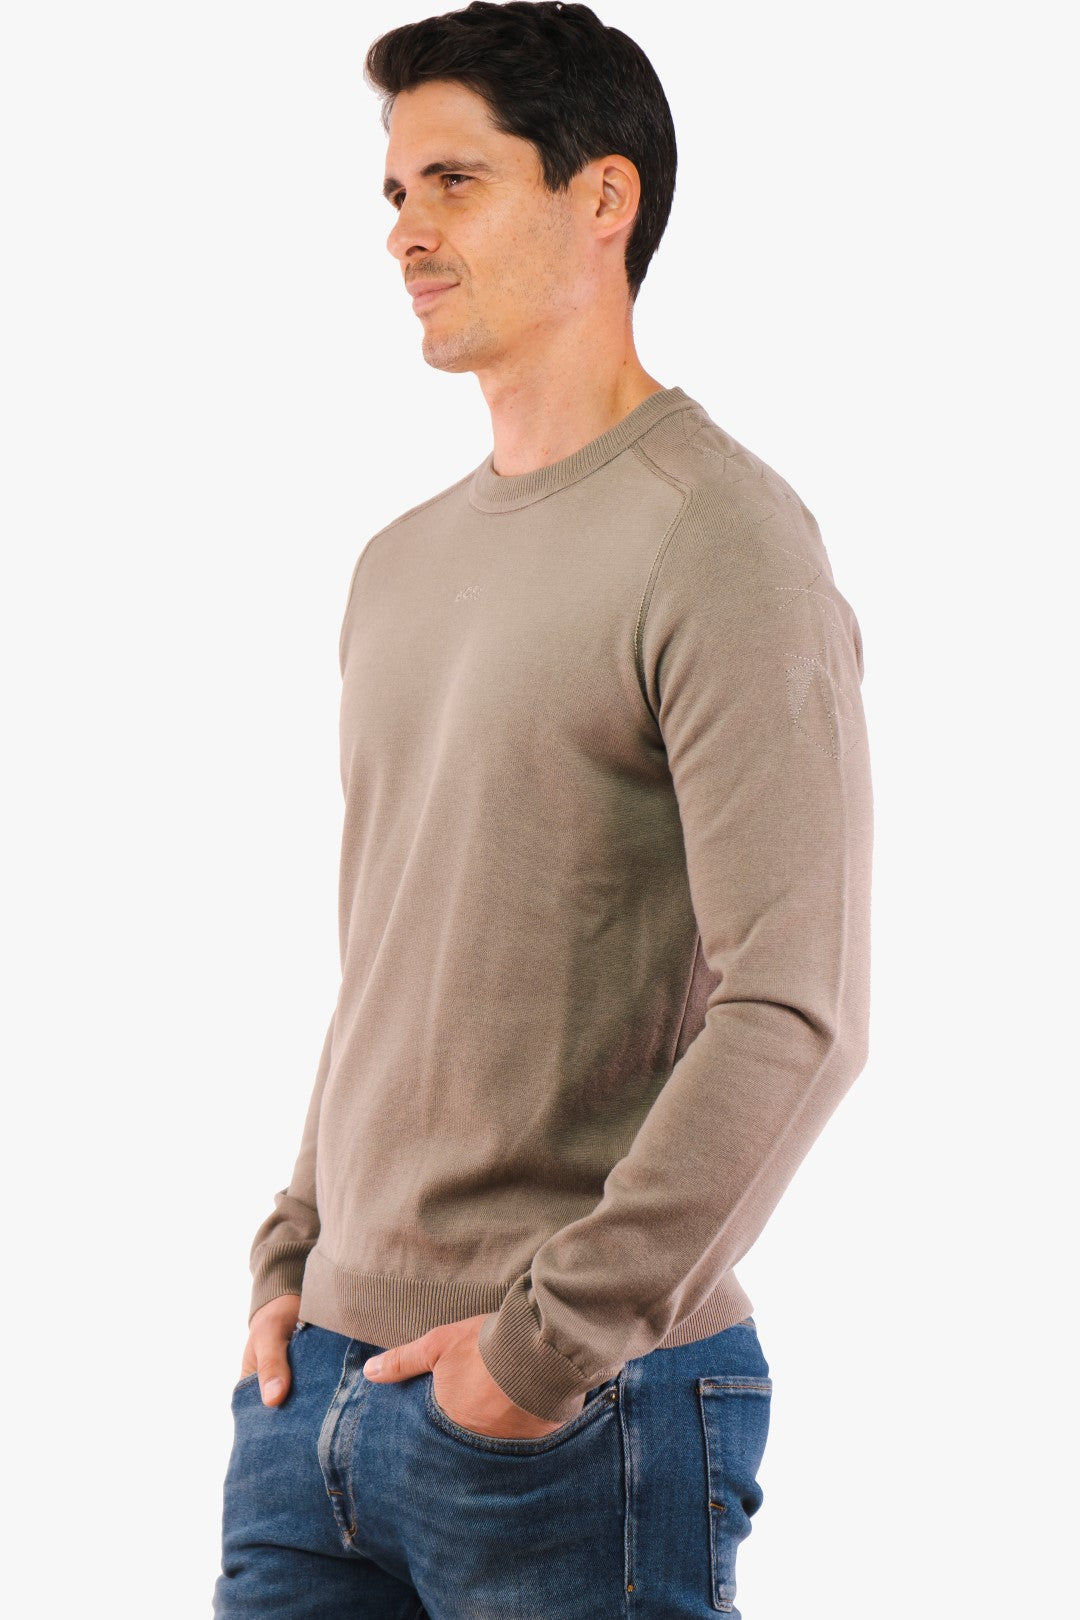 Hugo Boss sweater in Taupe color